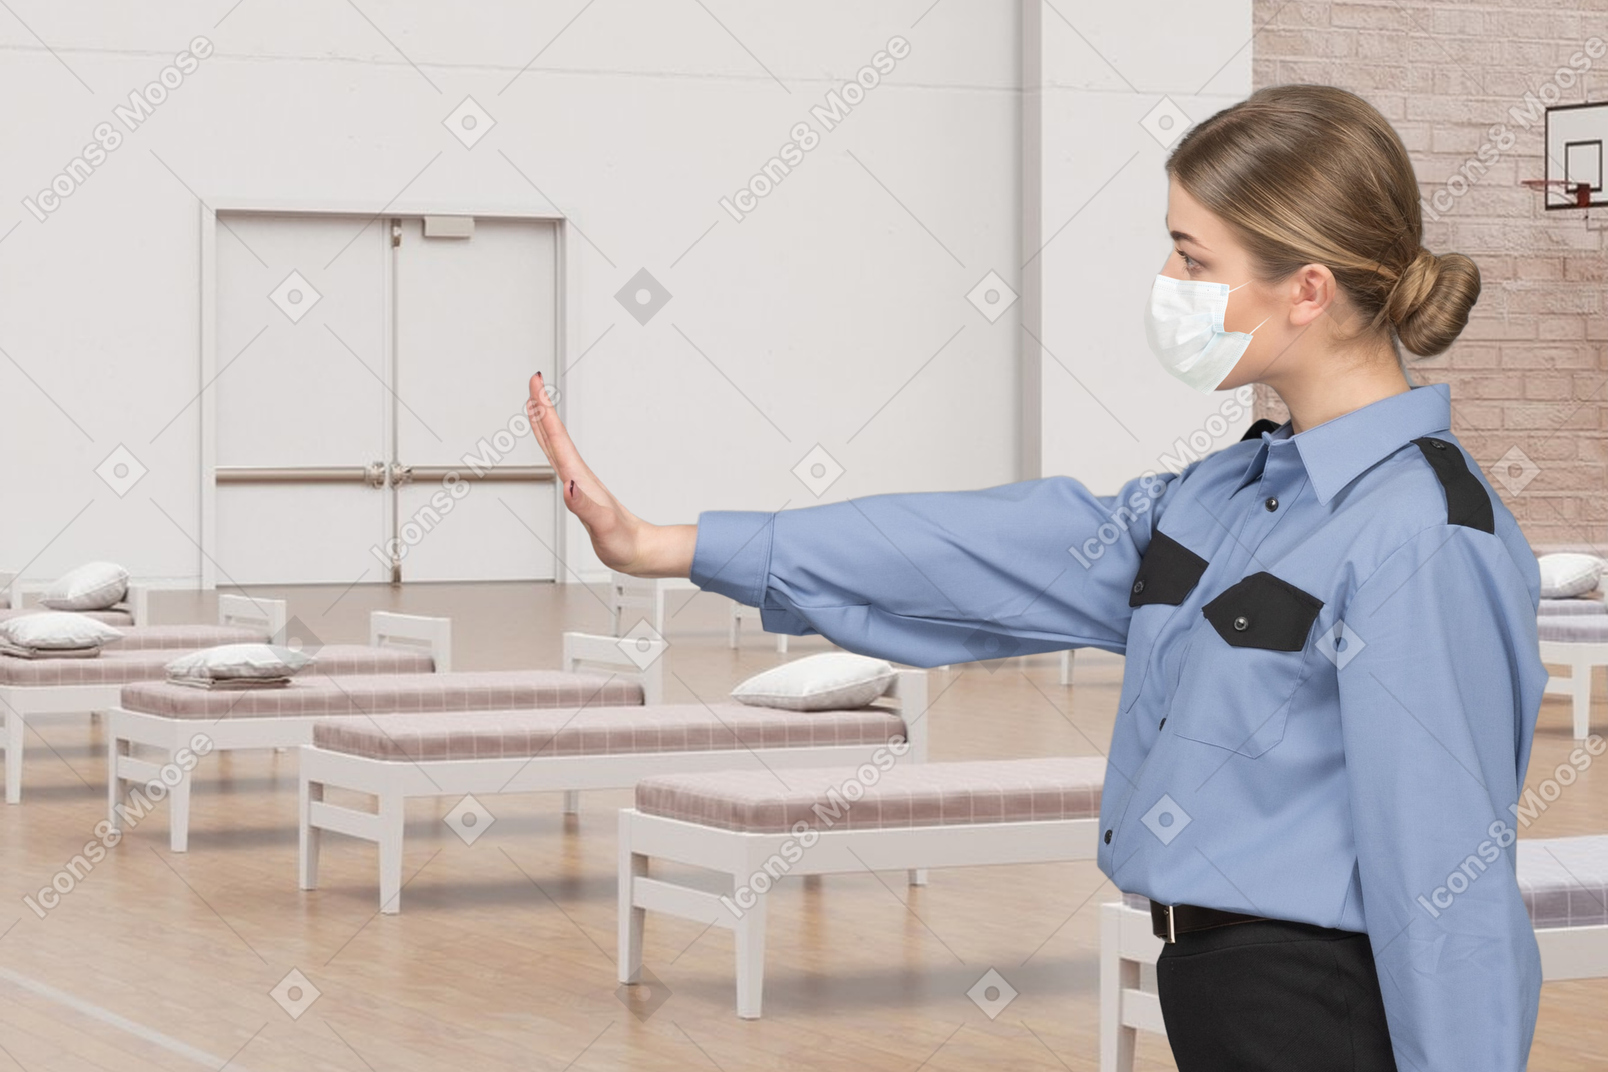 Female police officer showing stop hand gesture in a room with beds